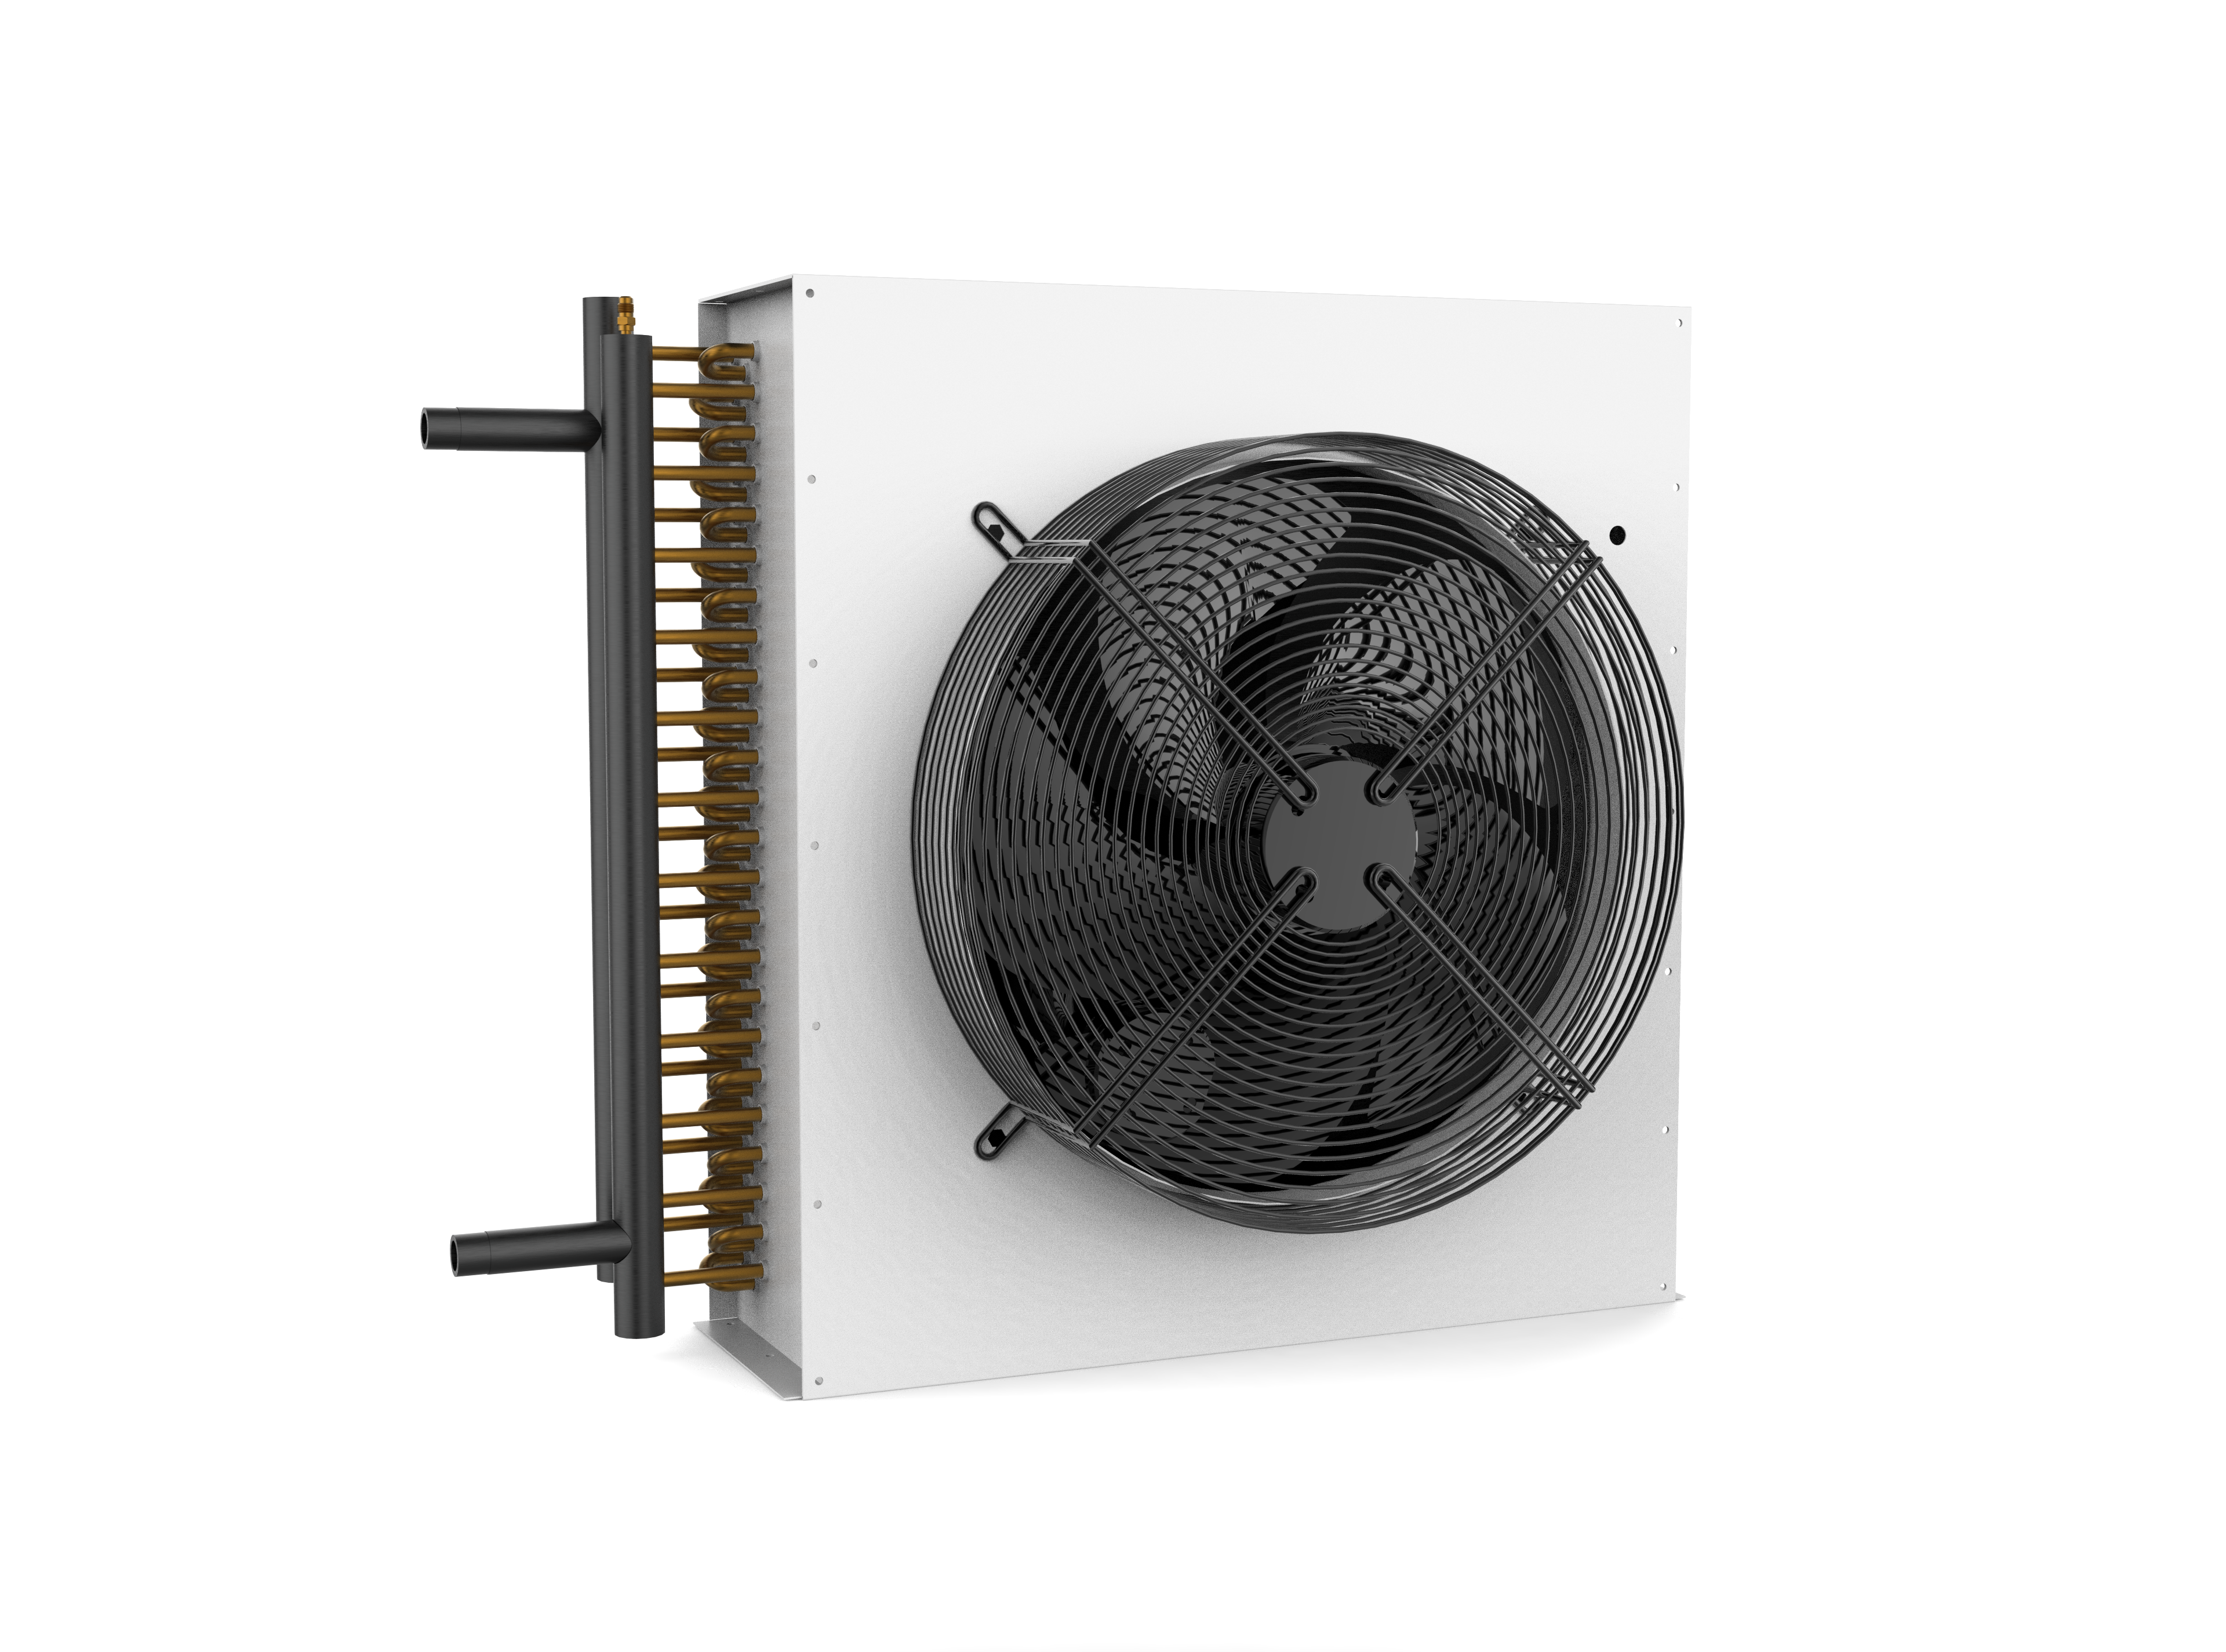 FogHashing_Immersion_cooling_kit-C1_Ultra-M30S/S19-_Dry_cooler_lateral_view